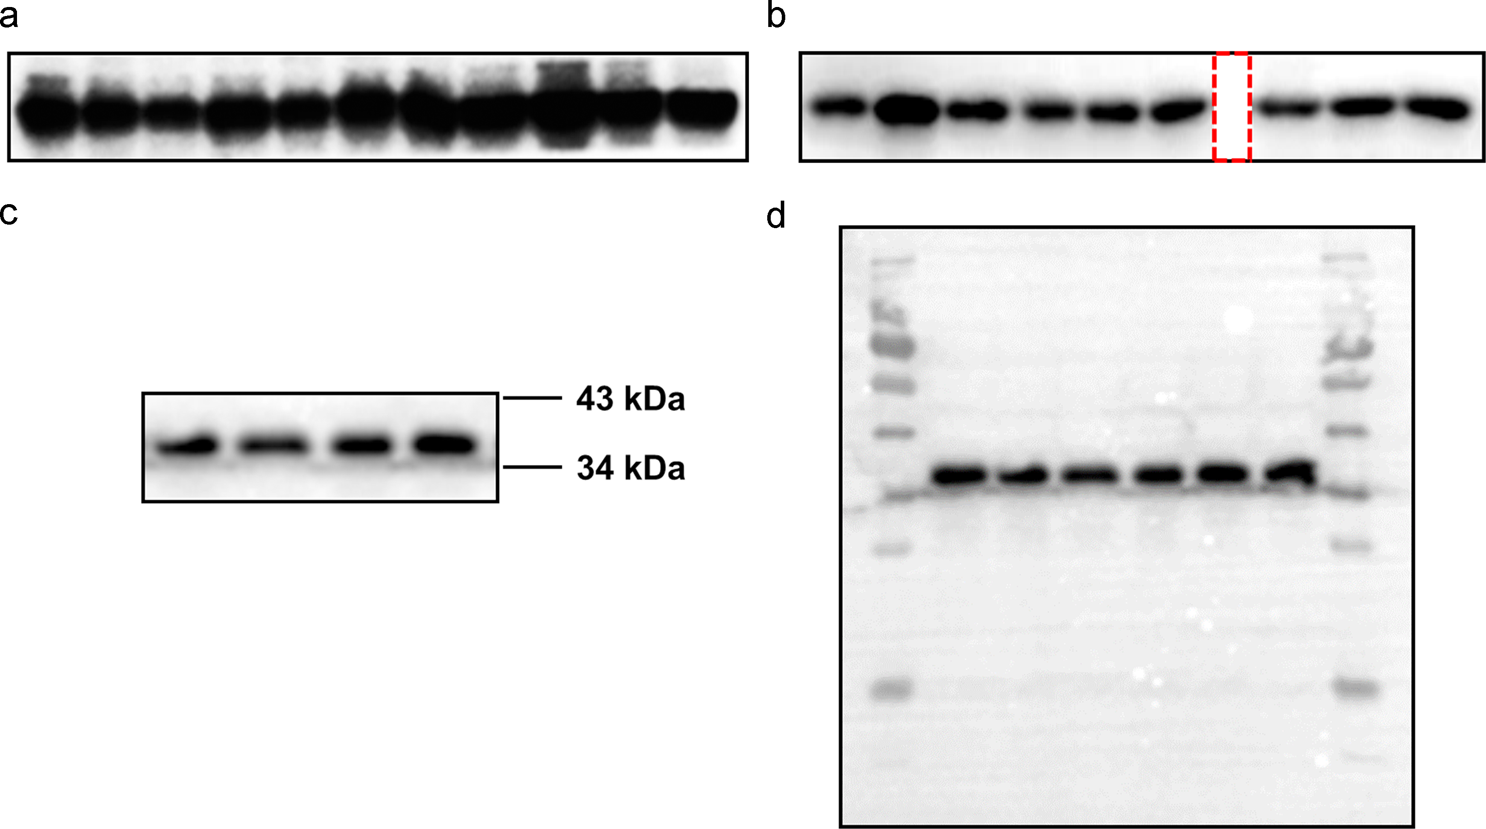 Western blots show p65 antibodies that passed the test of specificity